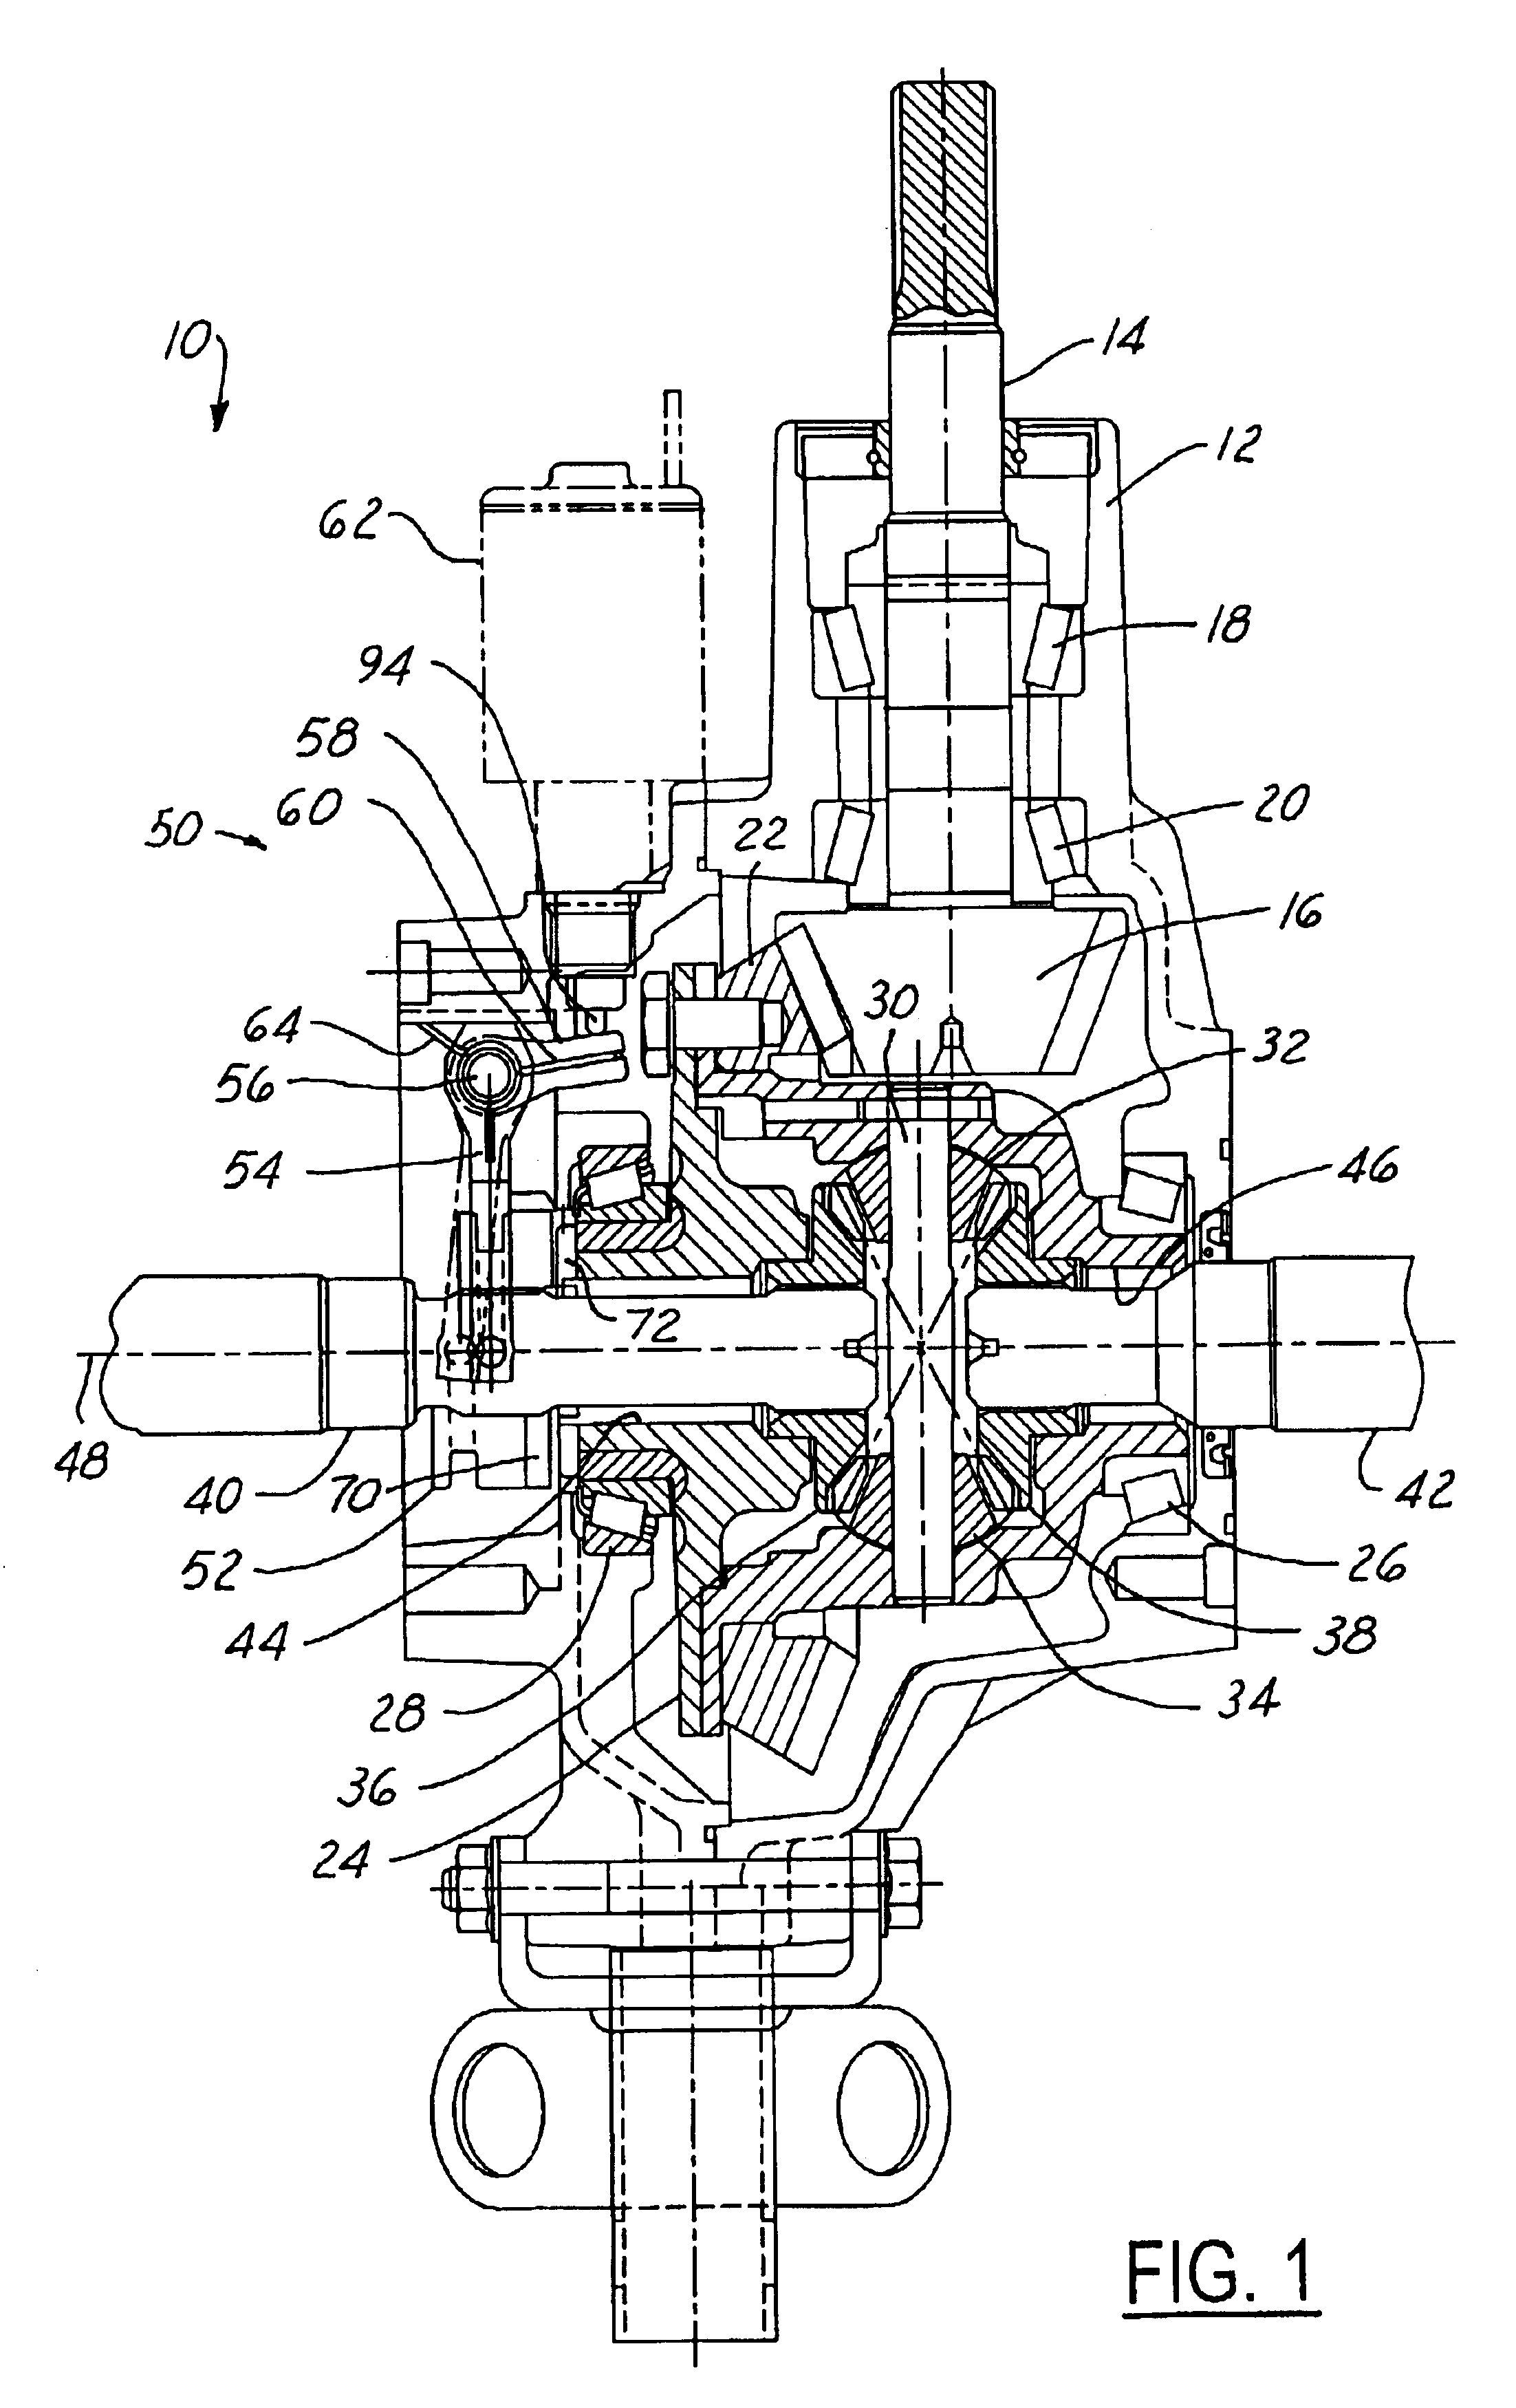 Position compensating differential locking mechanism